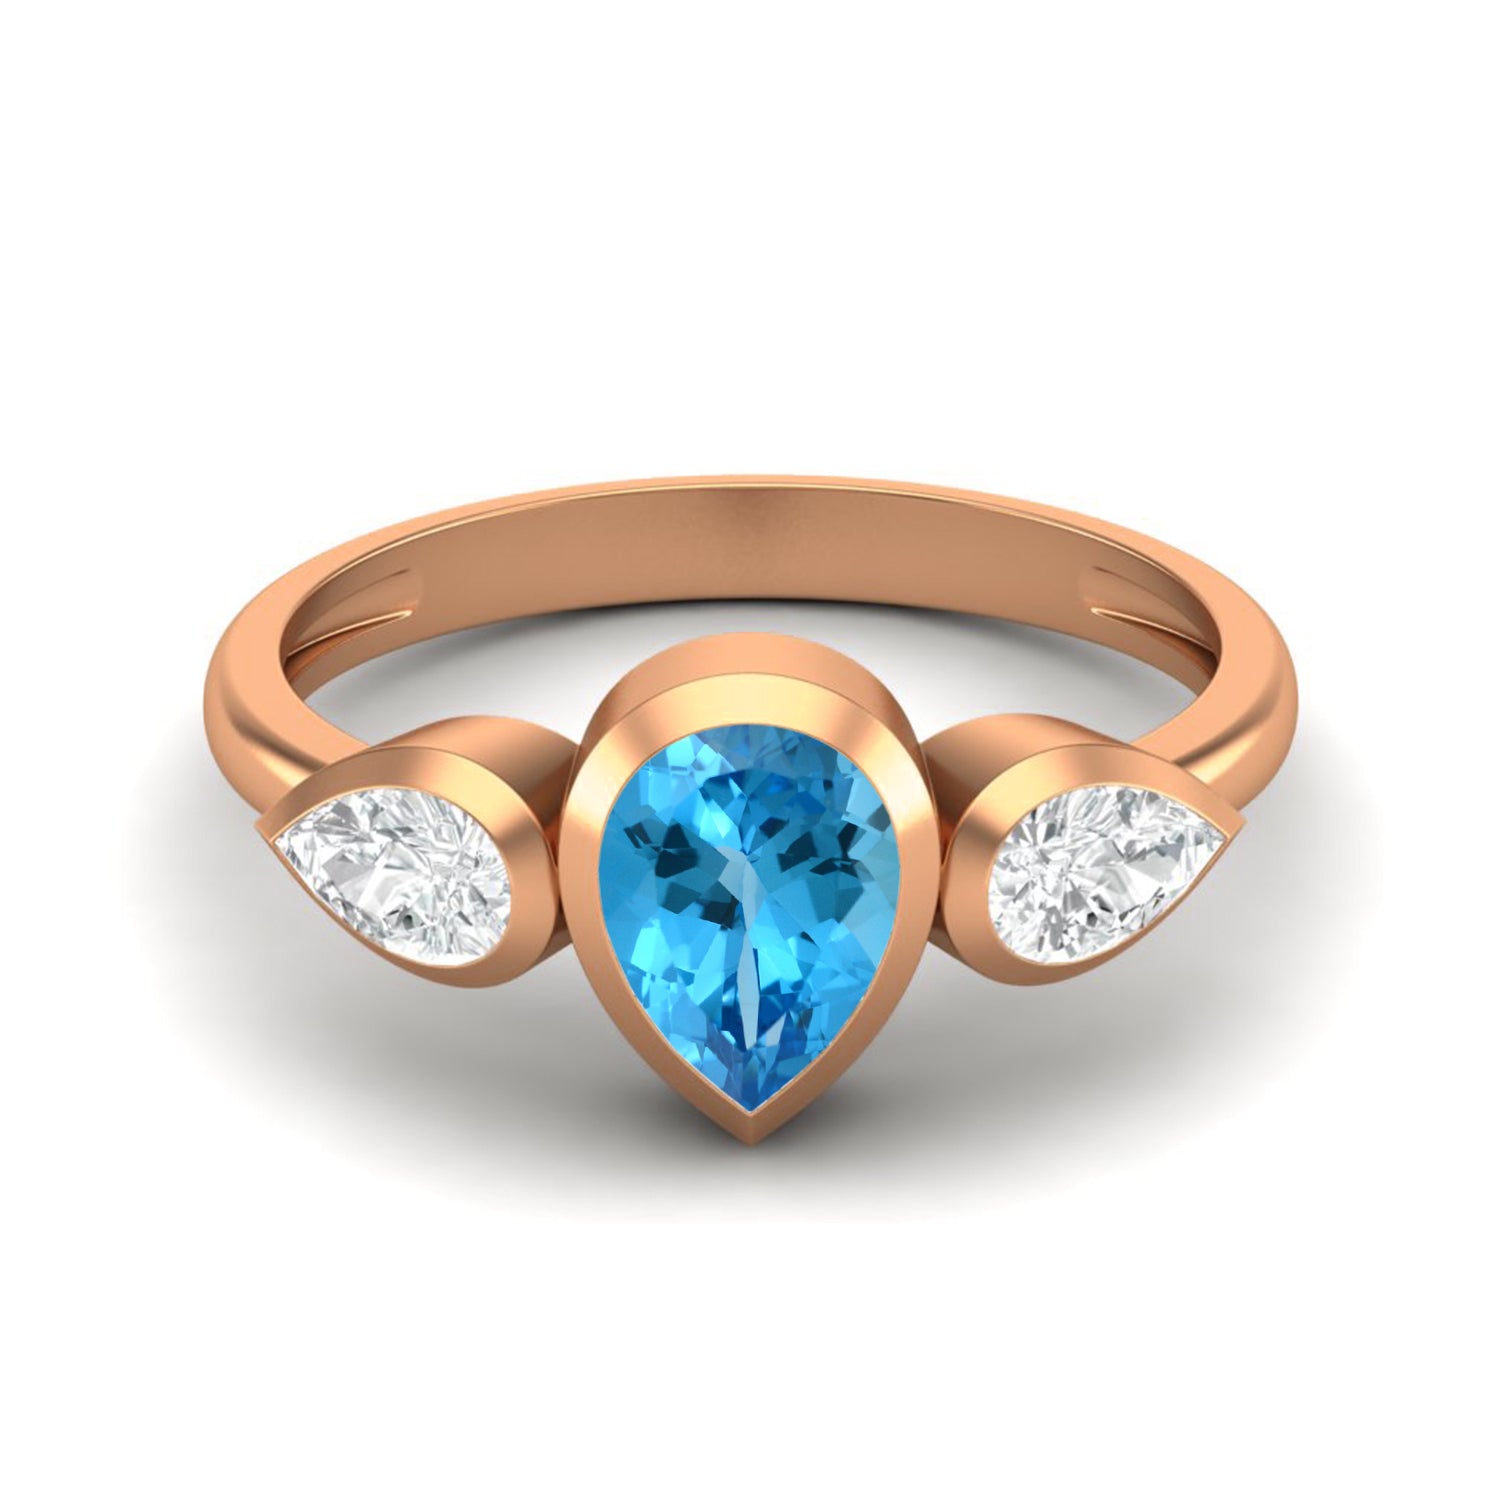 Aquamarine Rings Vs Blue Topaz Rings: Which One Is Right For You?